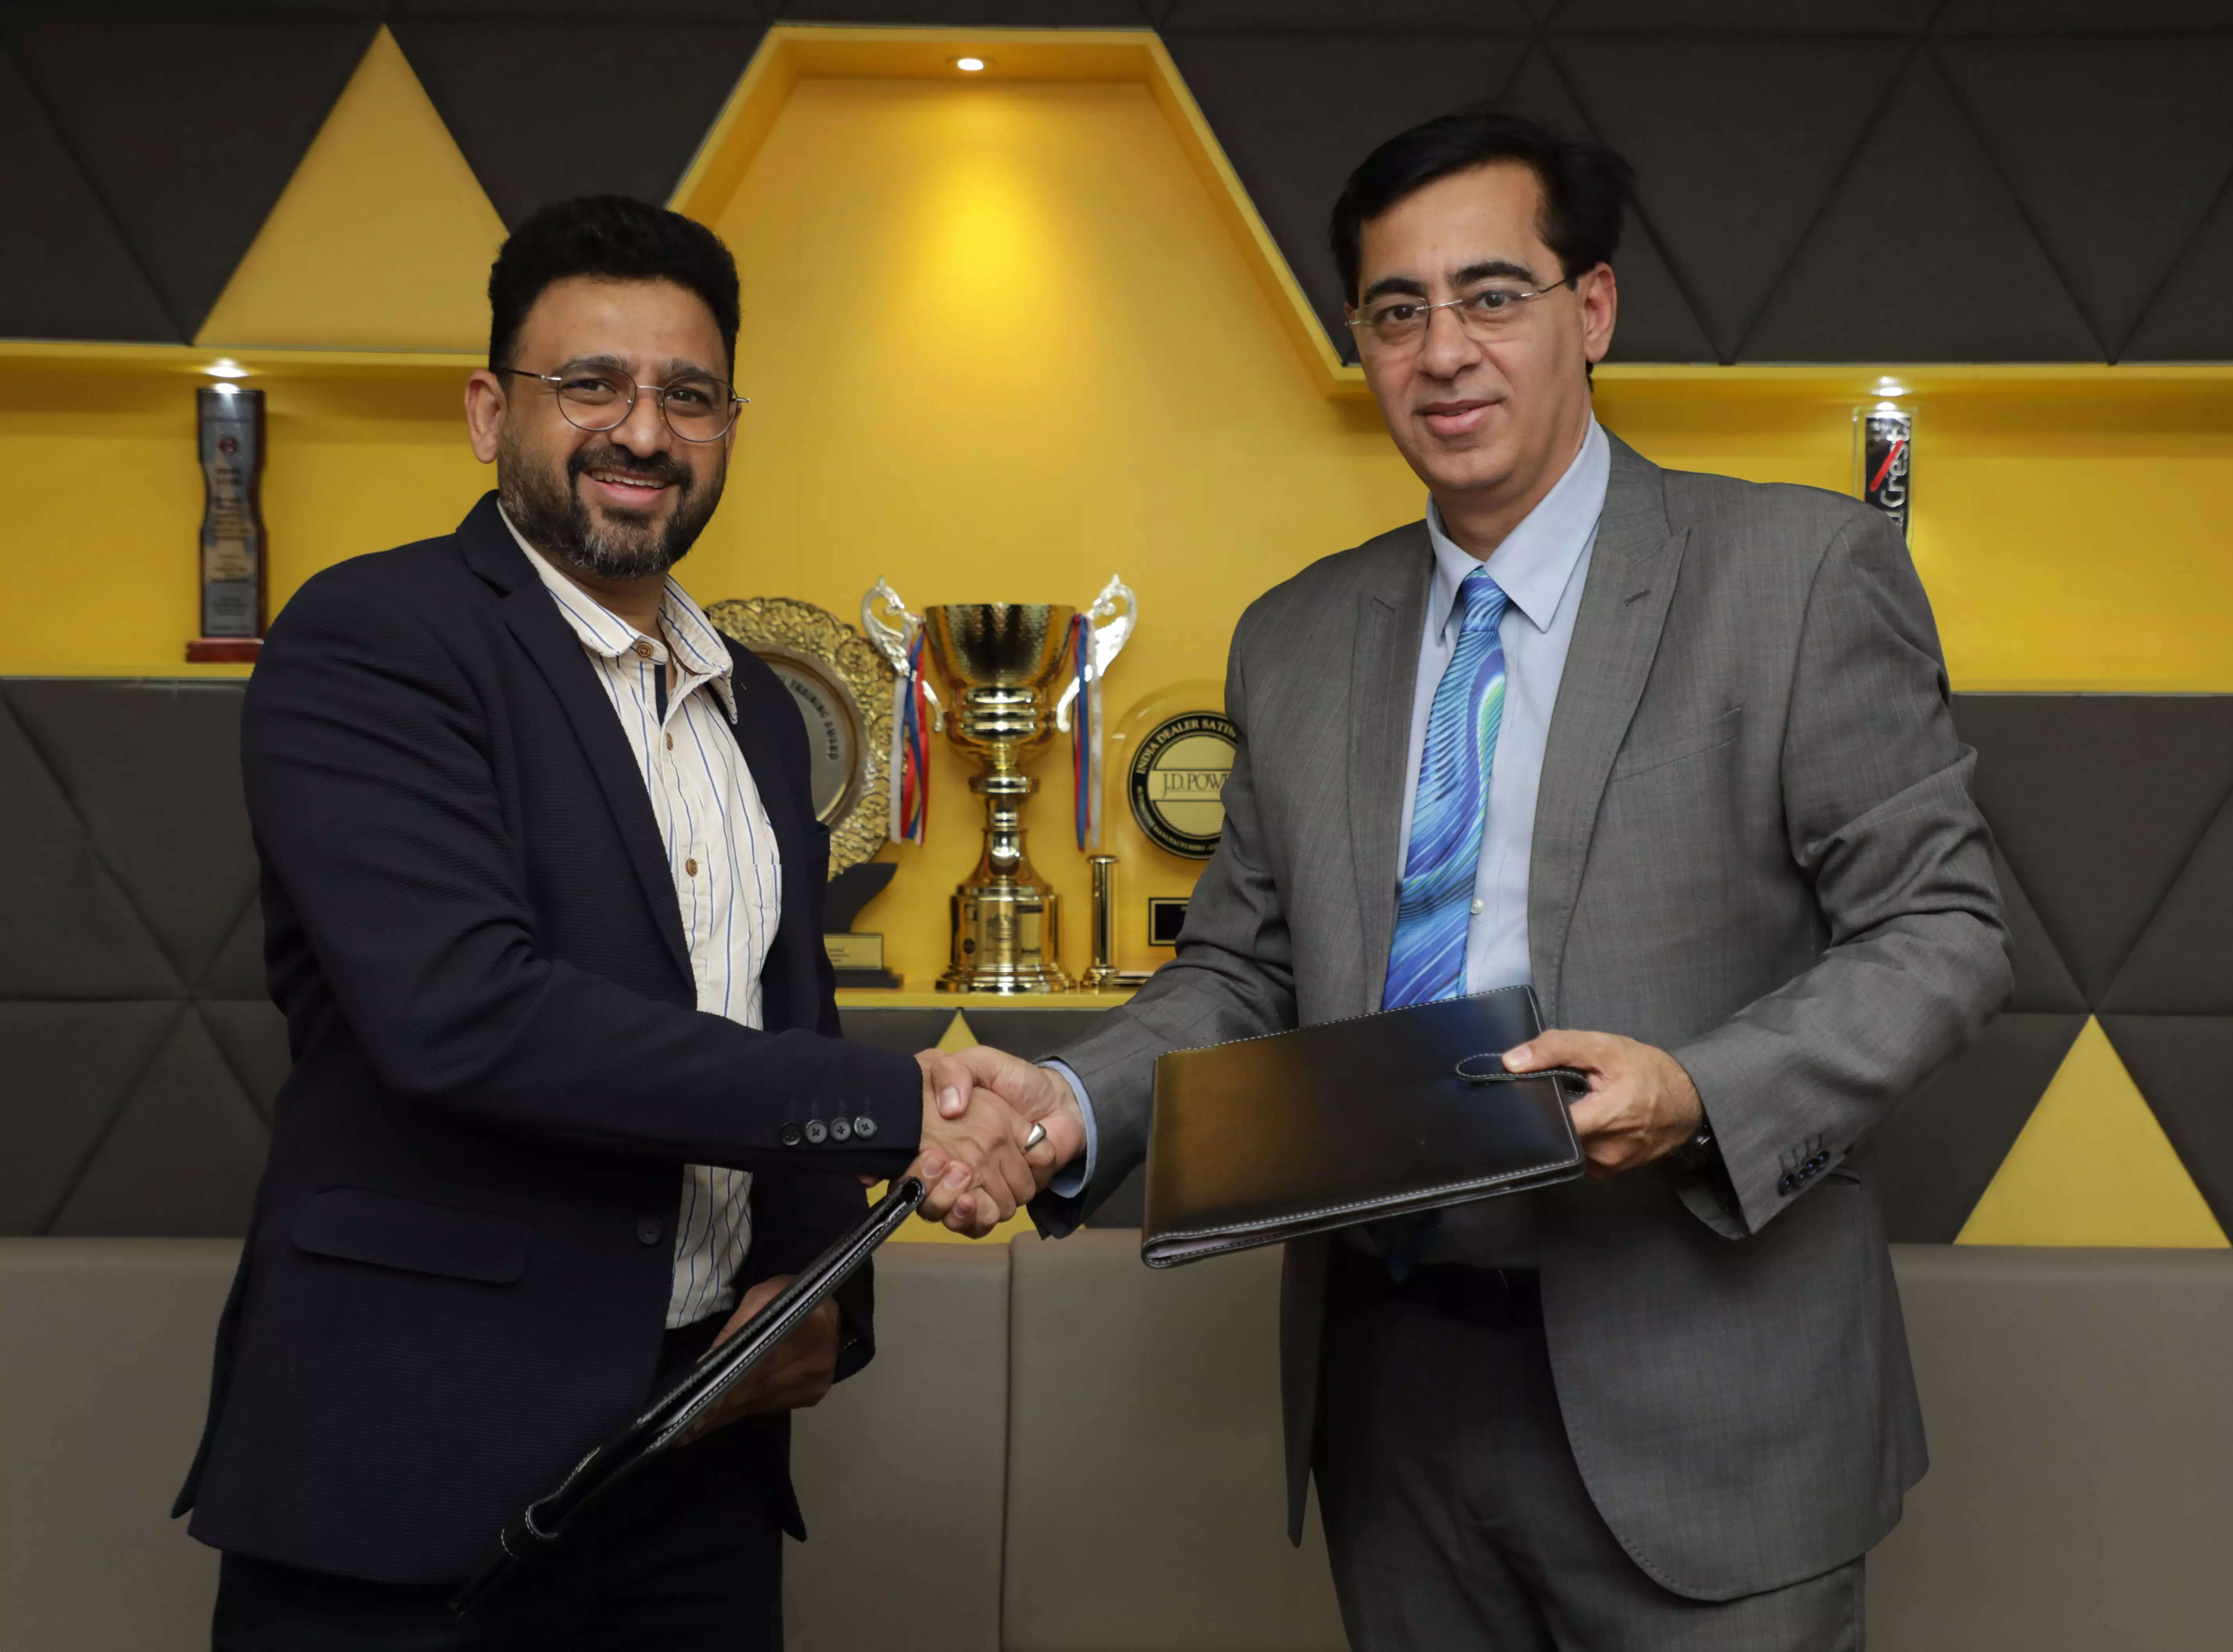 <p>This partnership aims to bring together two business that are at the forefront of fleet electrification and decarbonisation in India, Vertelo CEO Sandeep Gambhir said.</p>